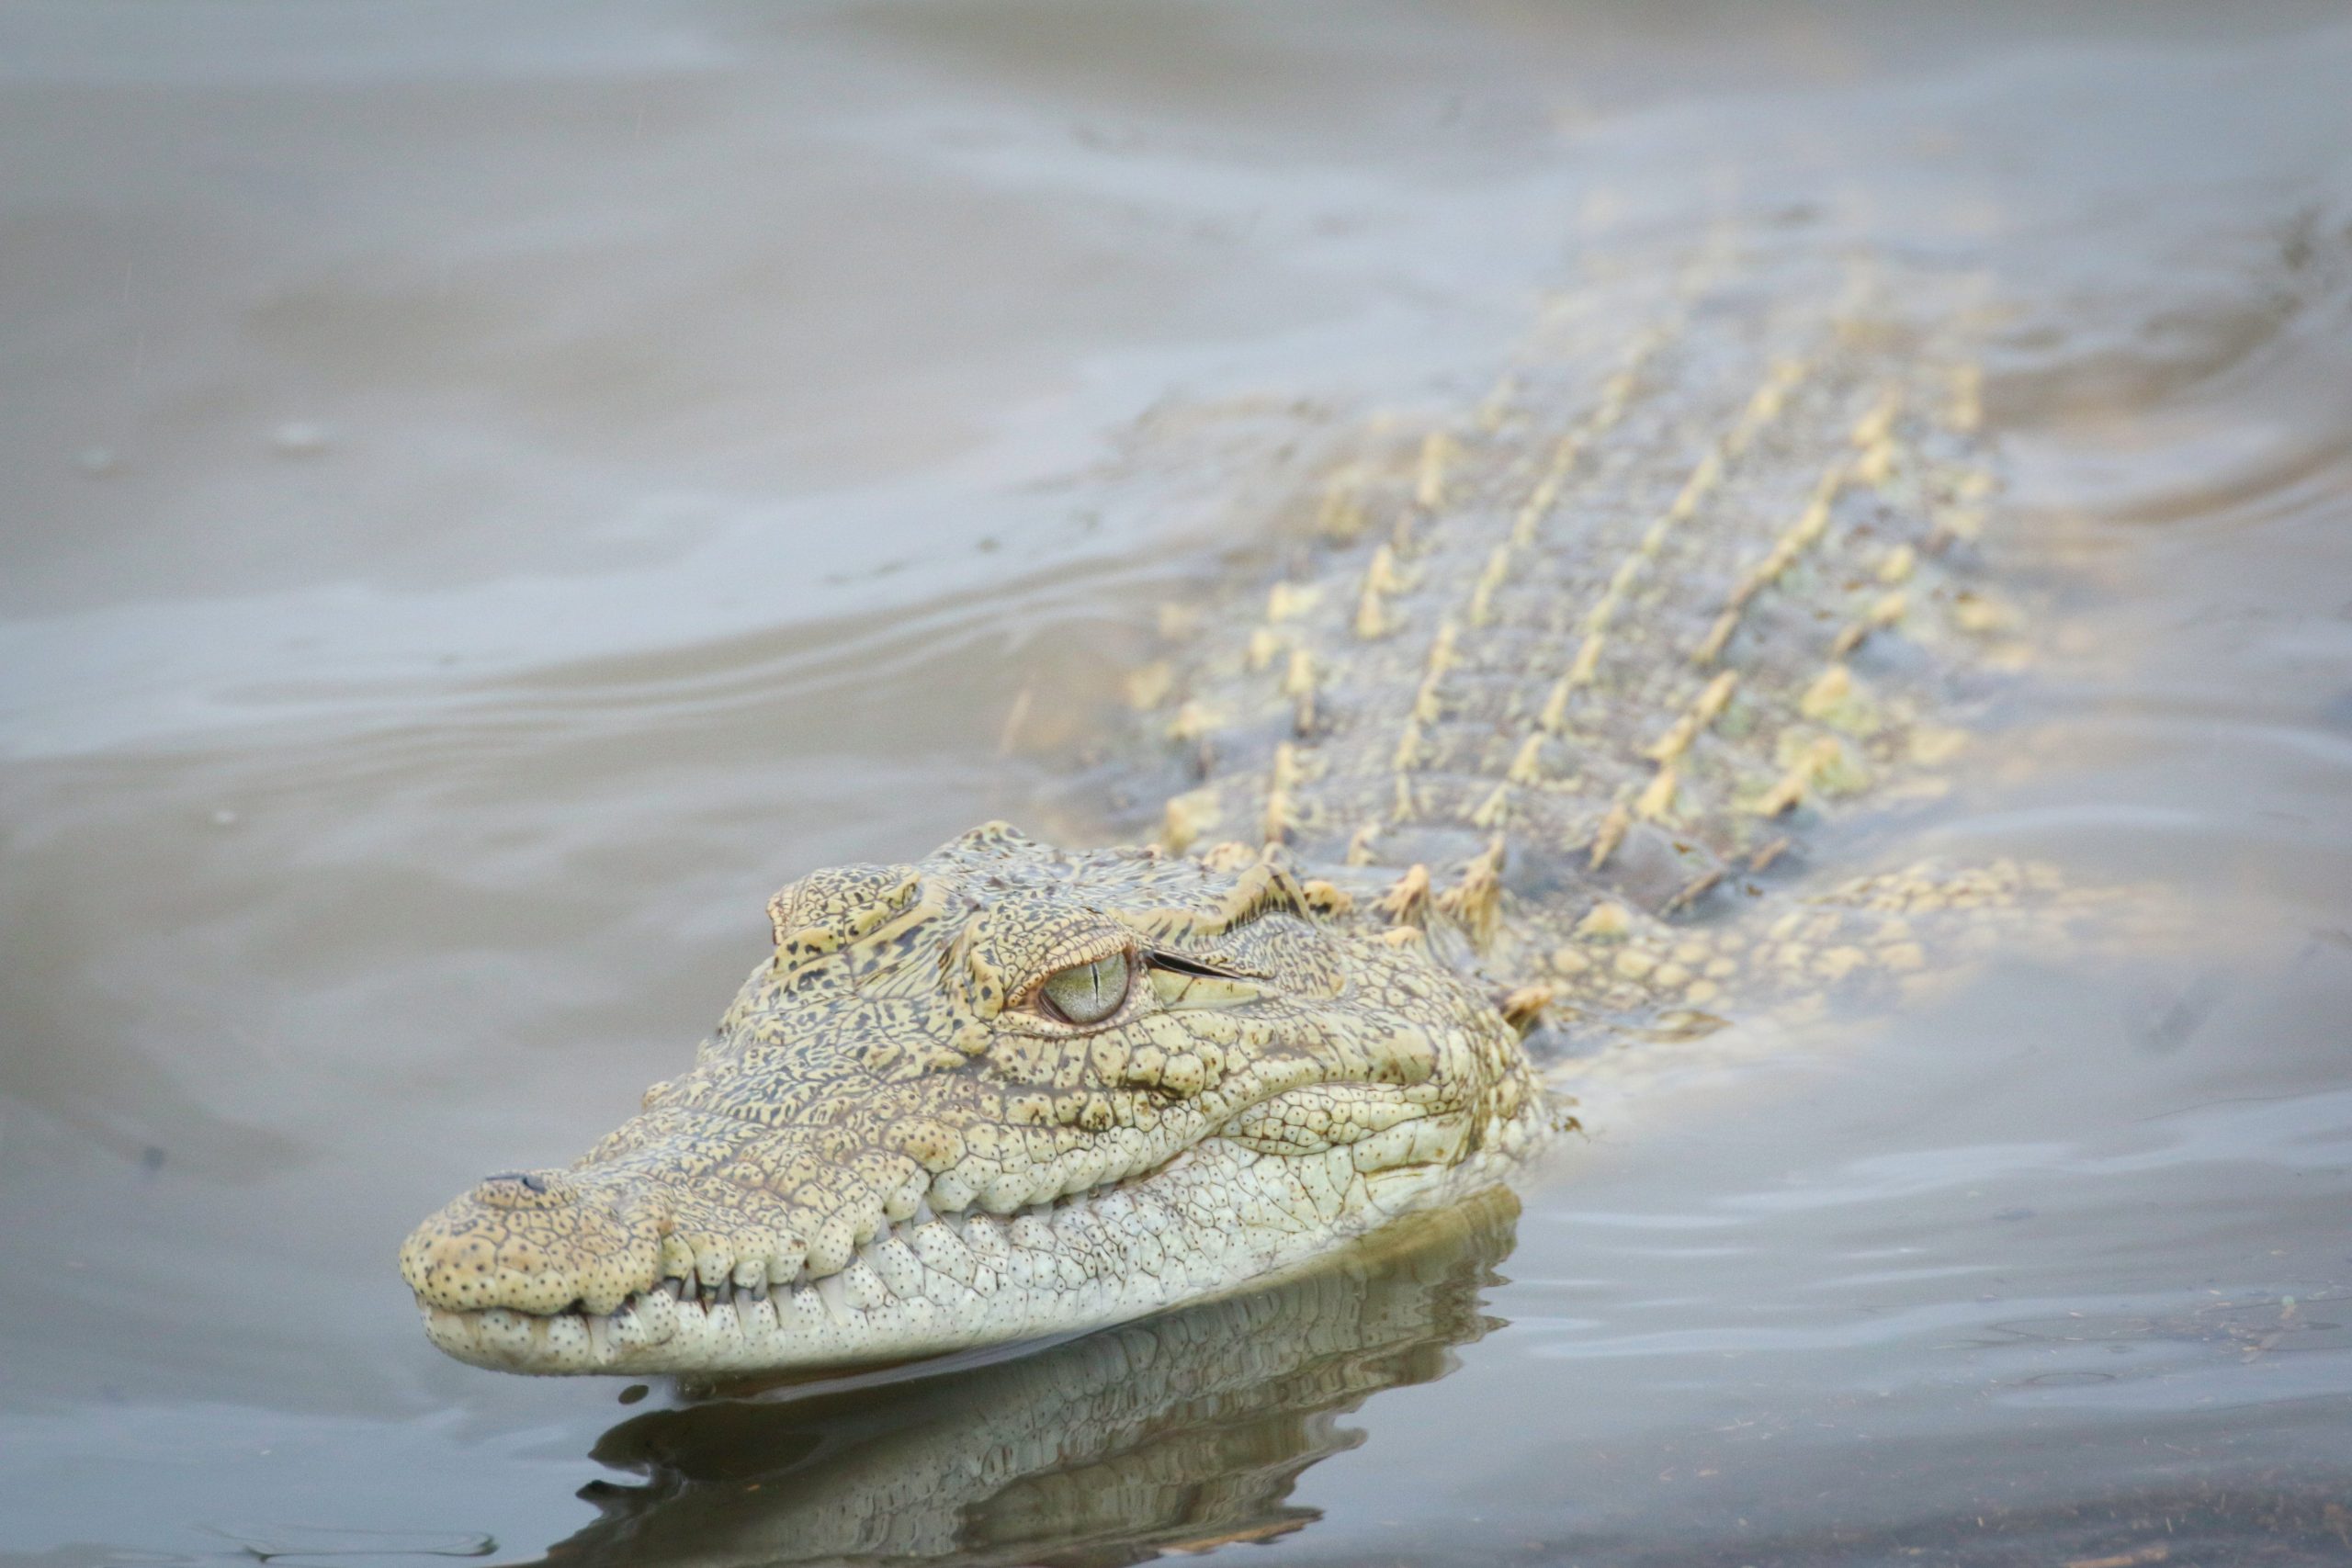 Love your pet, no matter the size: Man in Gujarat pats crocodile and talks to the reptile